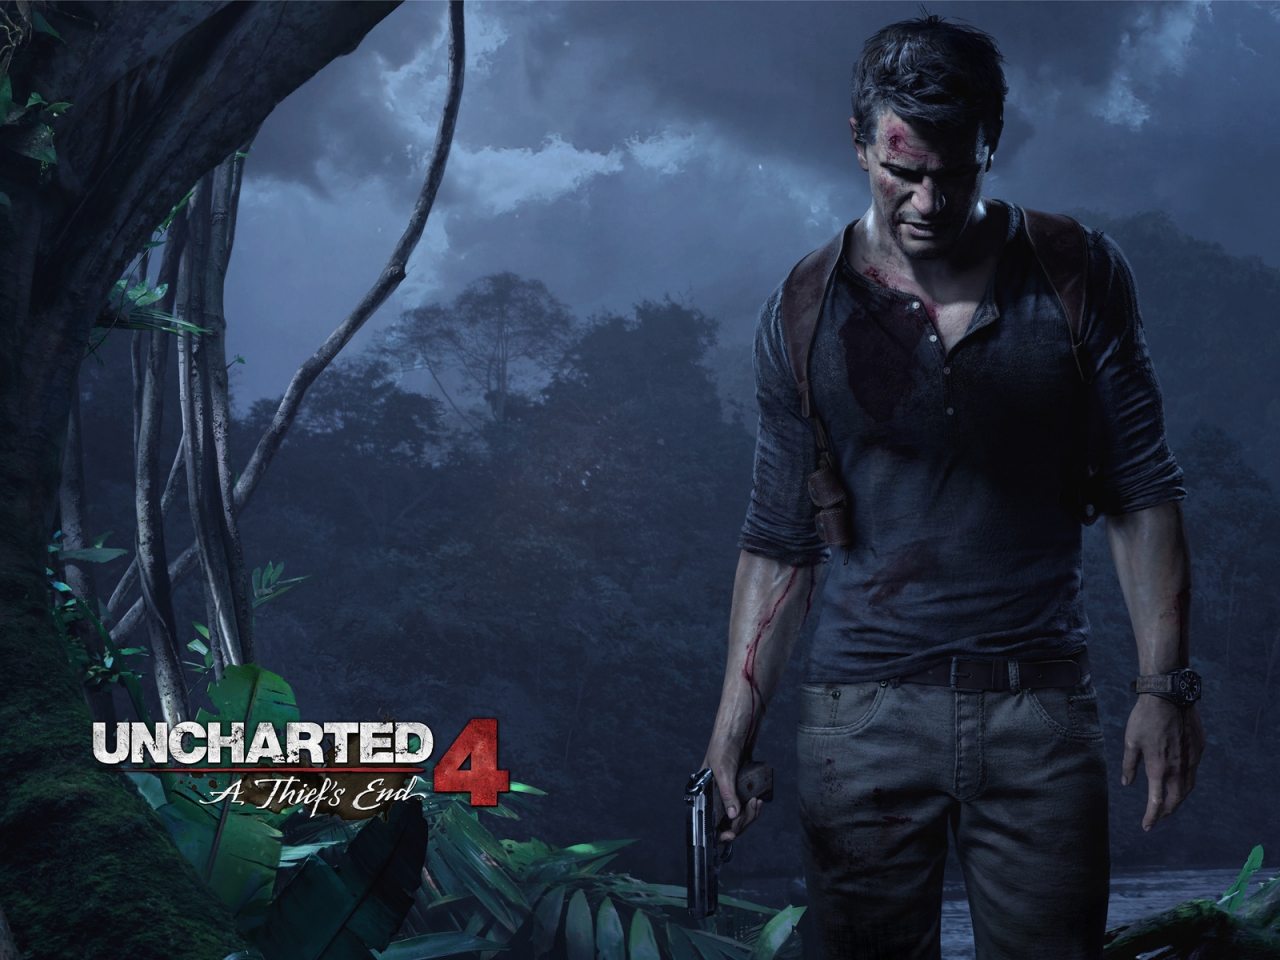 Uncharted 4 for 1280 x 960 resolution